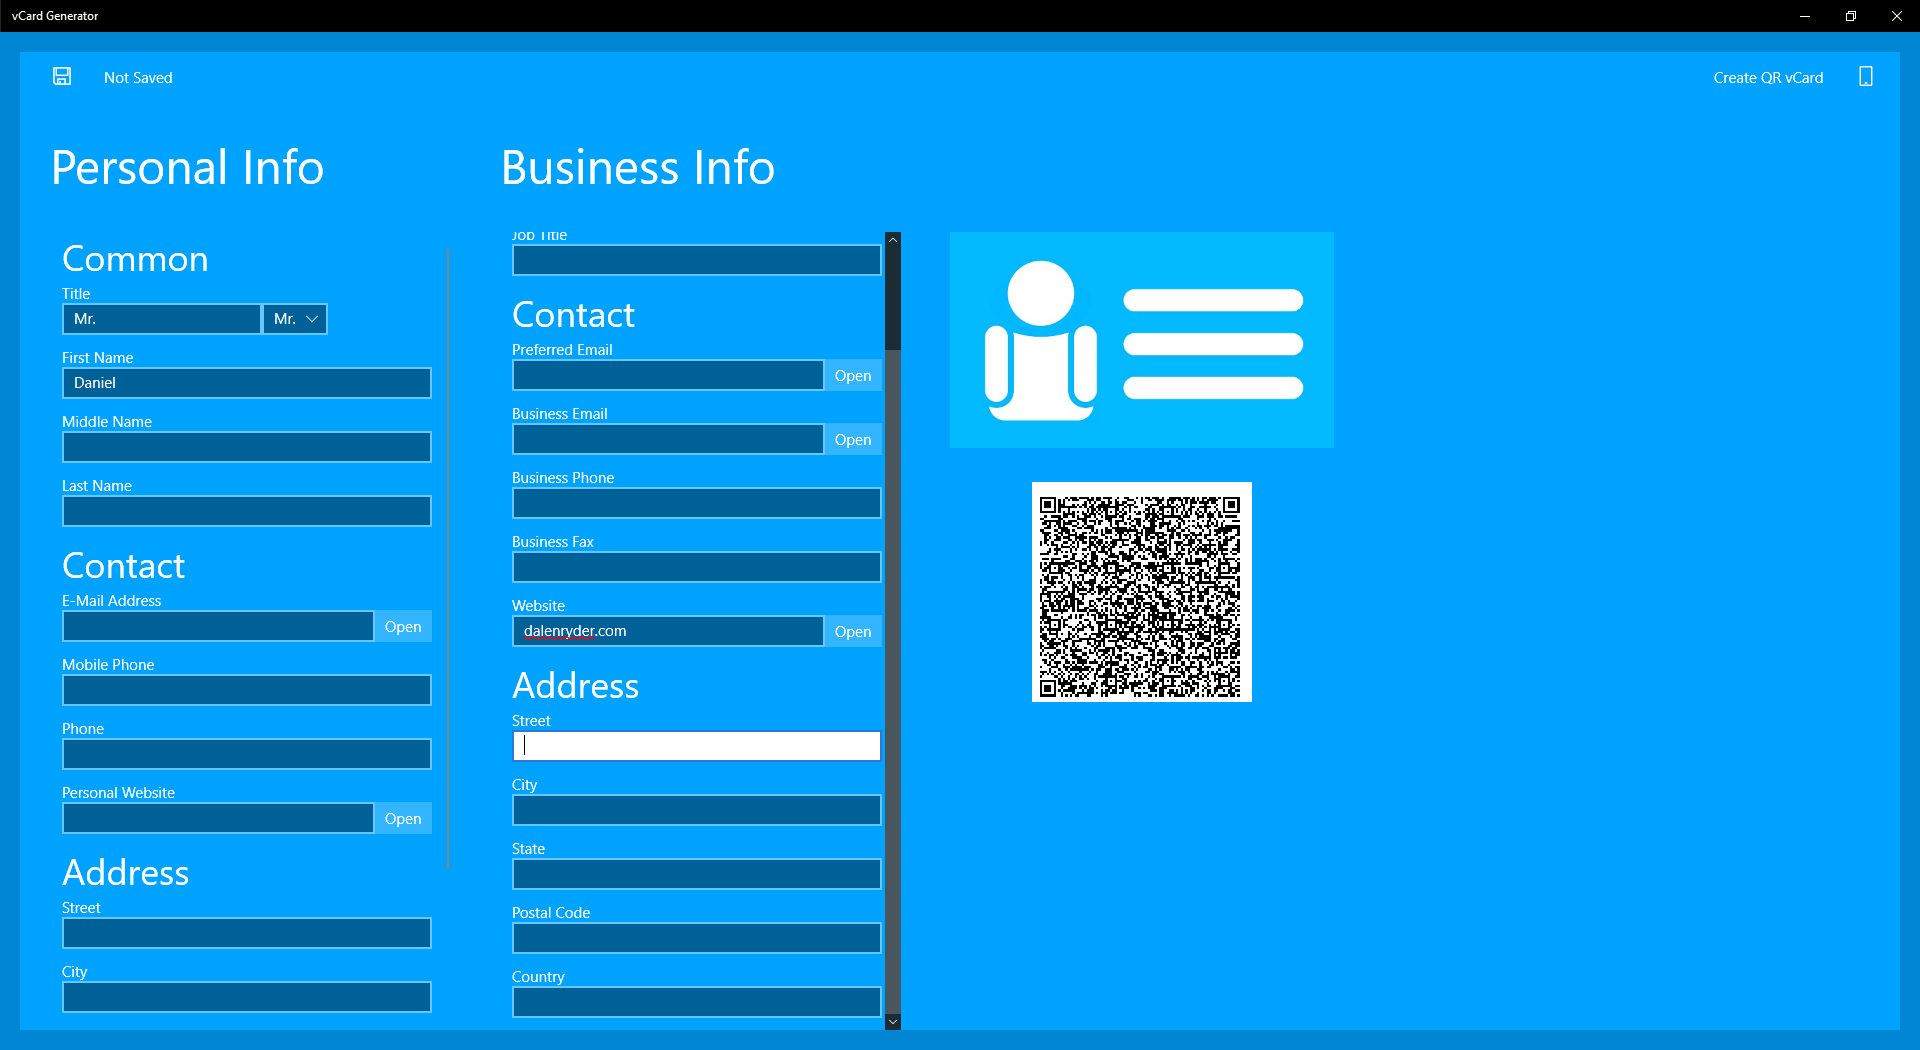 Generate a QR vCard that you can scan with your phone